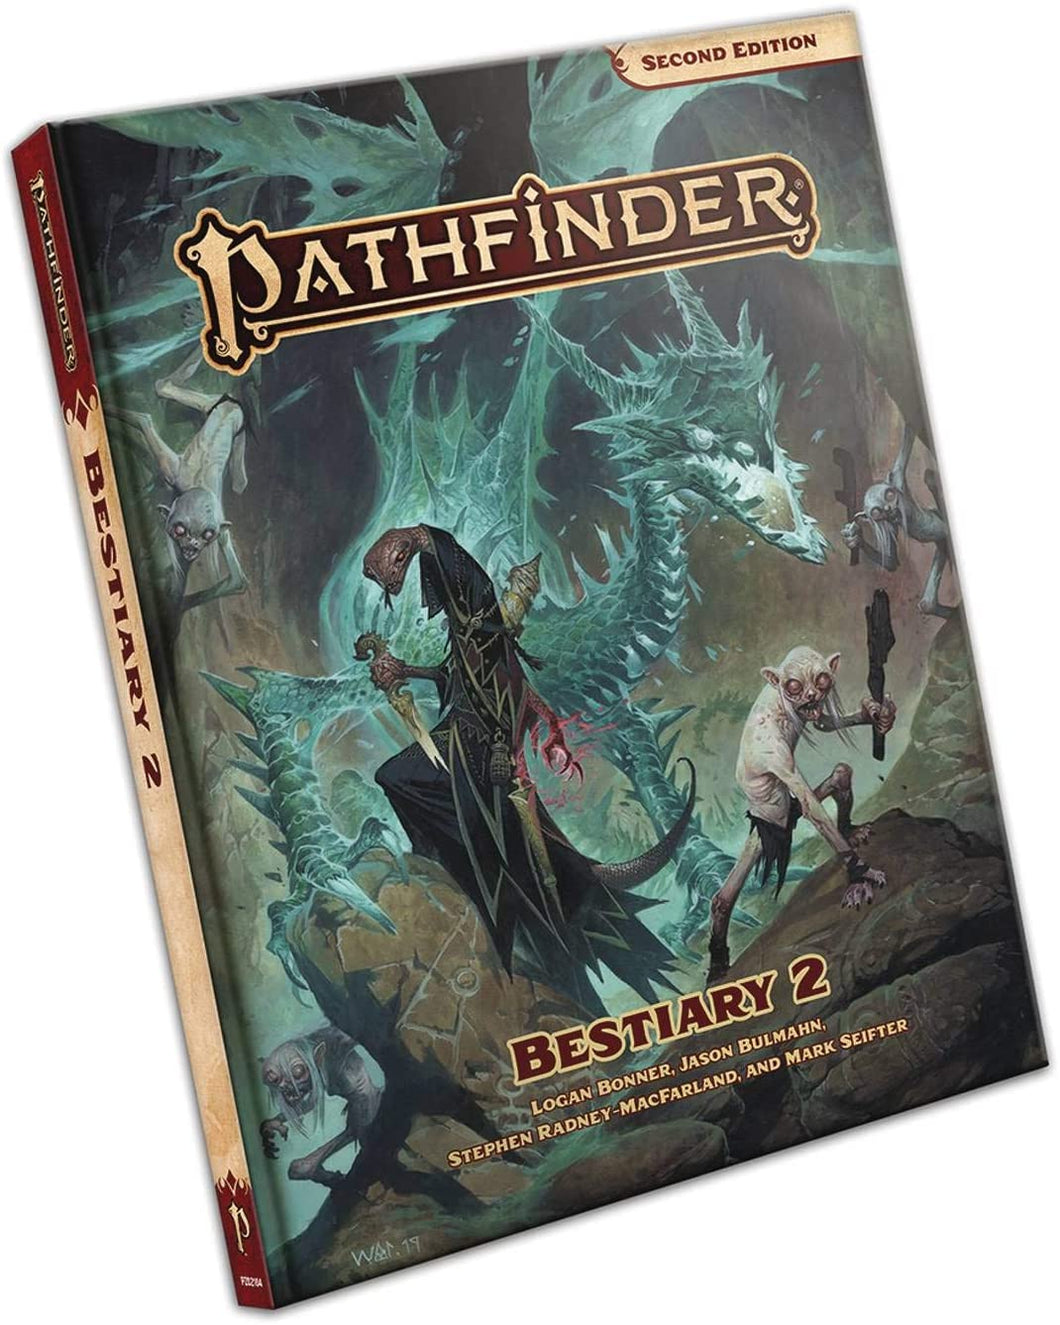 Pathfinder Bestiary 2 Second Edition Hardcover